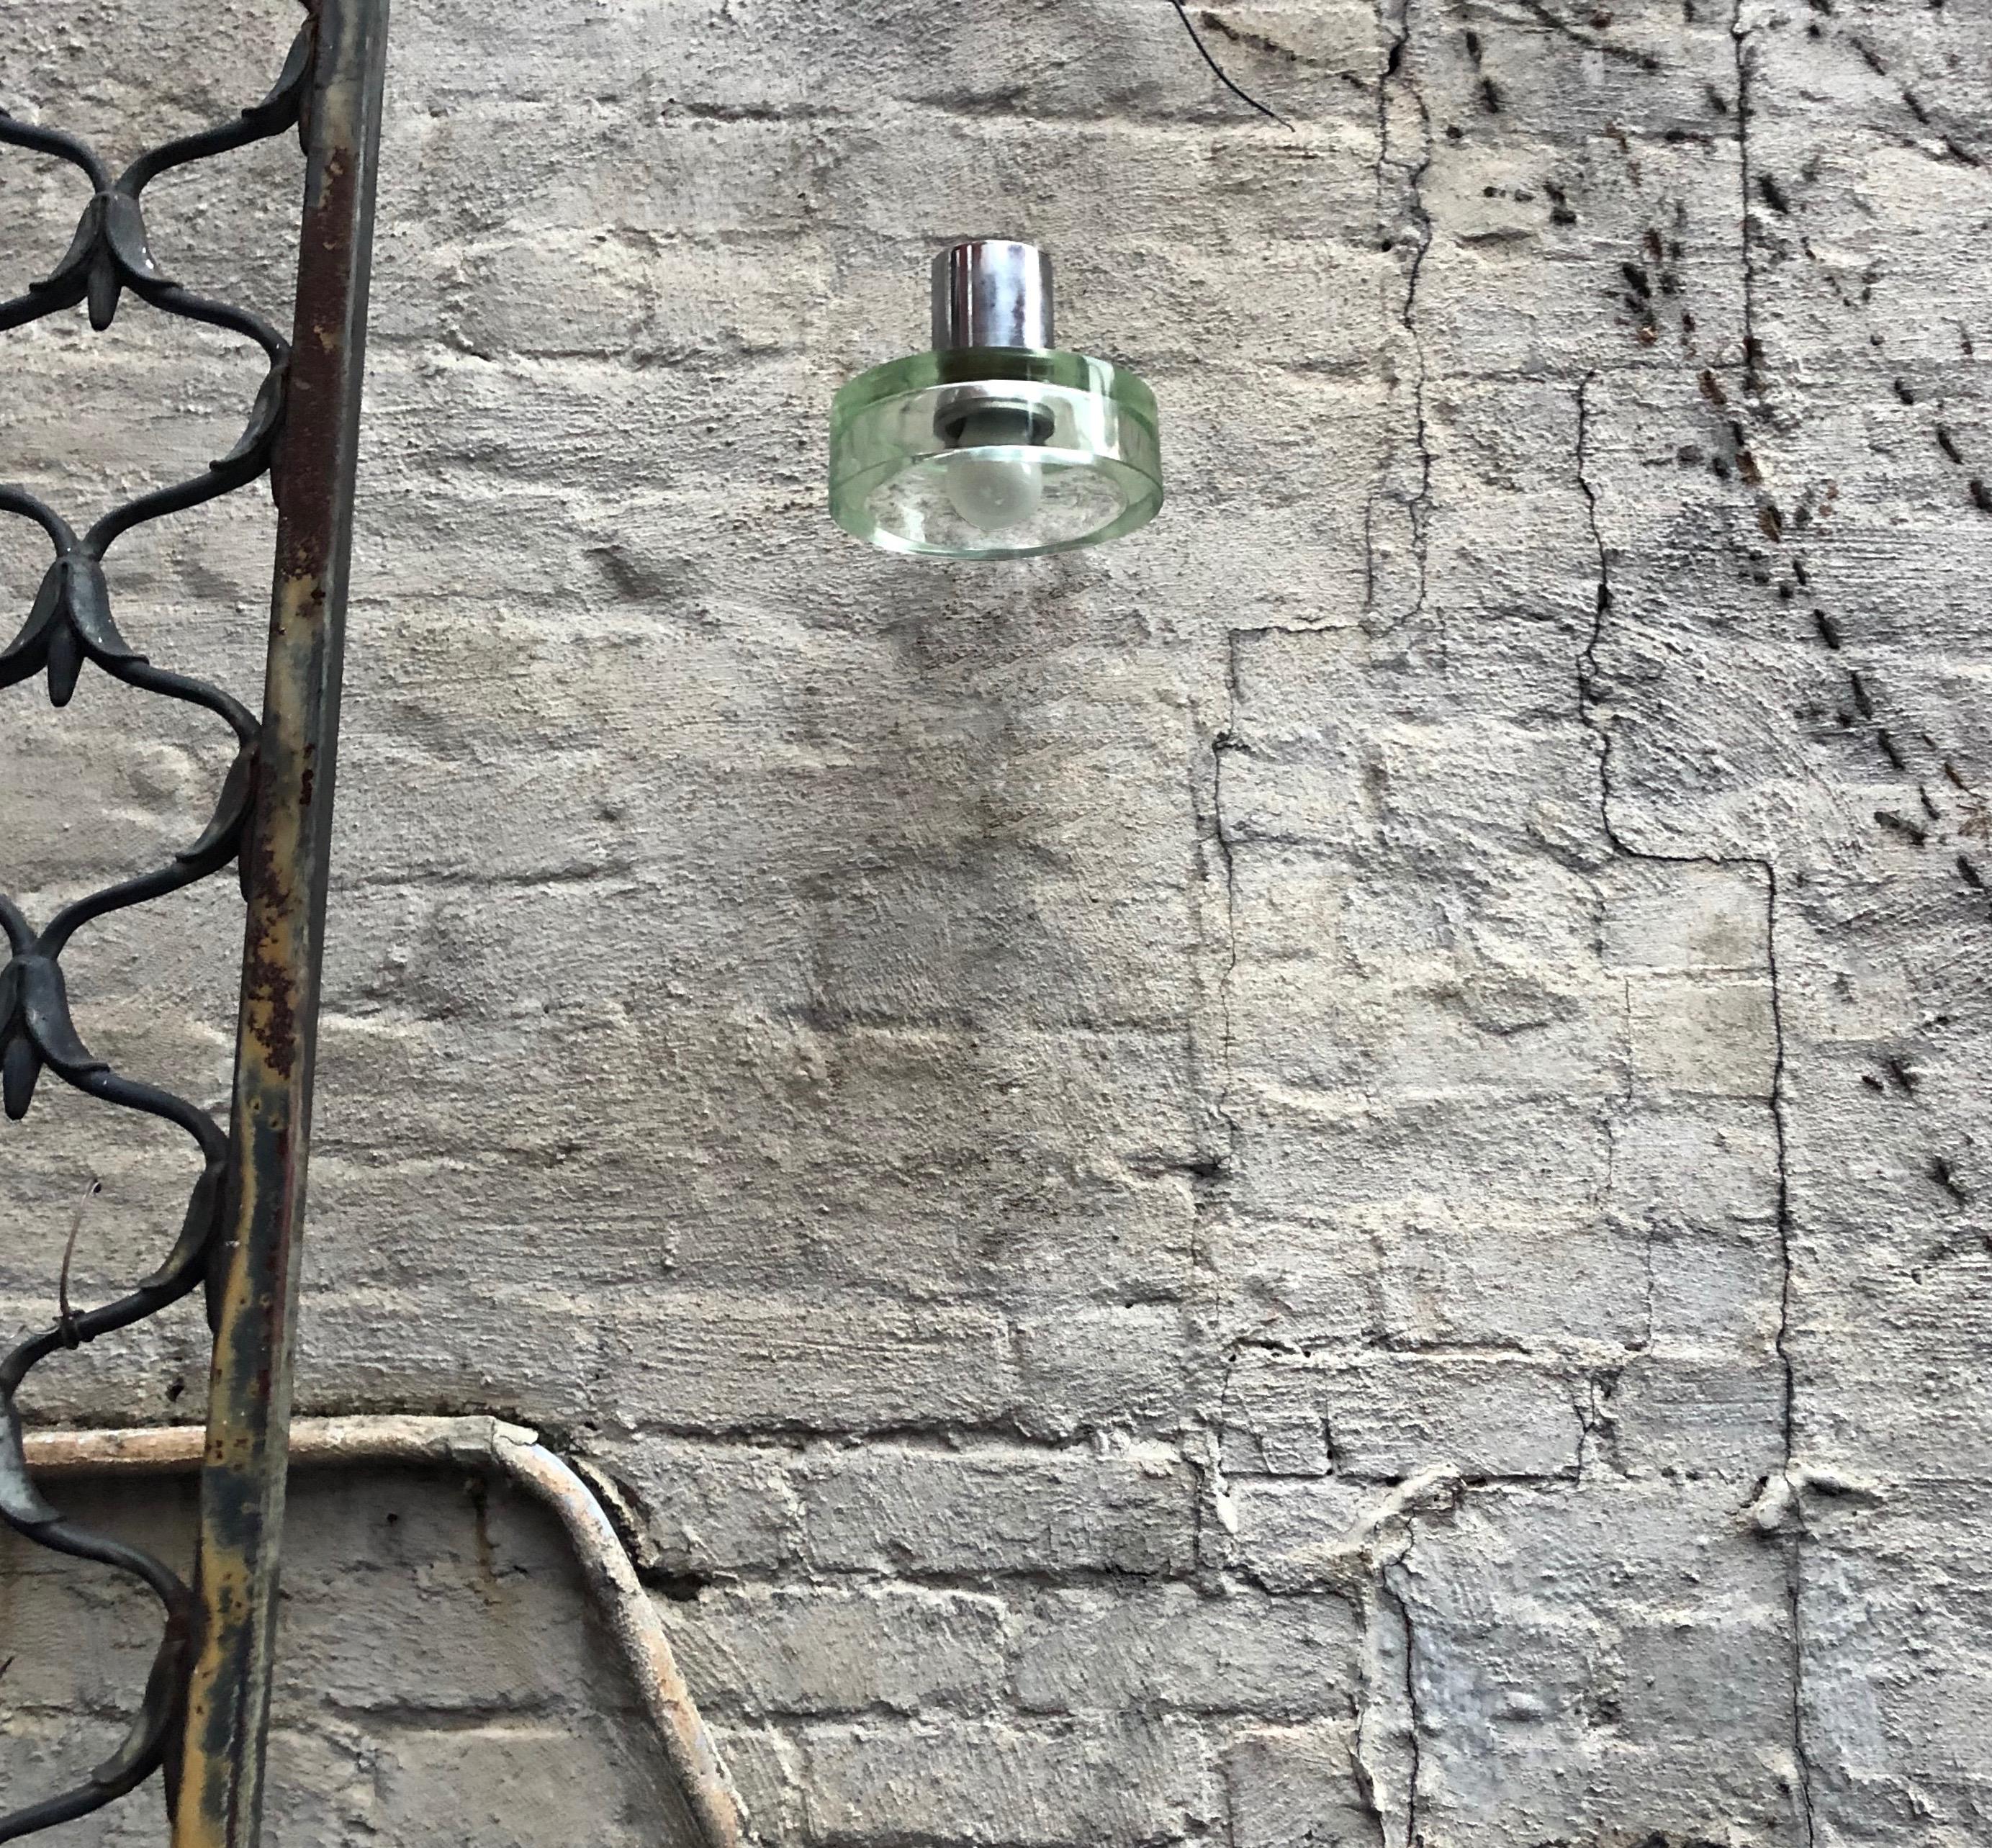 Pair of sconces designed by Flavio Poli for Seguso each with nickel plated hardware and a rectangular mounting plate, all that support a round, pale green, 1.8 cm thick glass diffuser. Each sconce has a single US standard socket, and the lights can